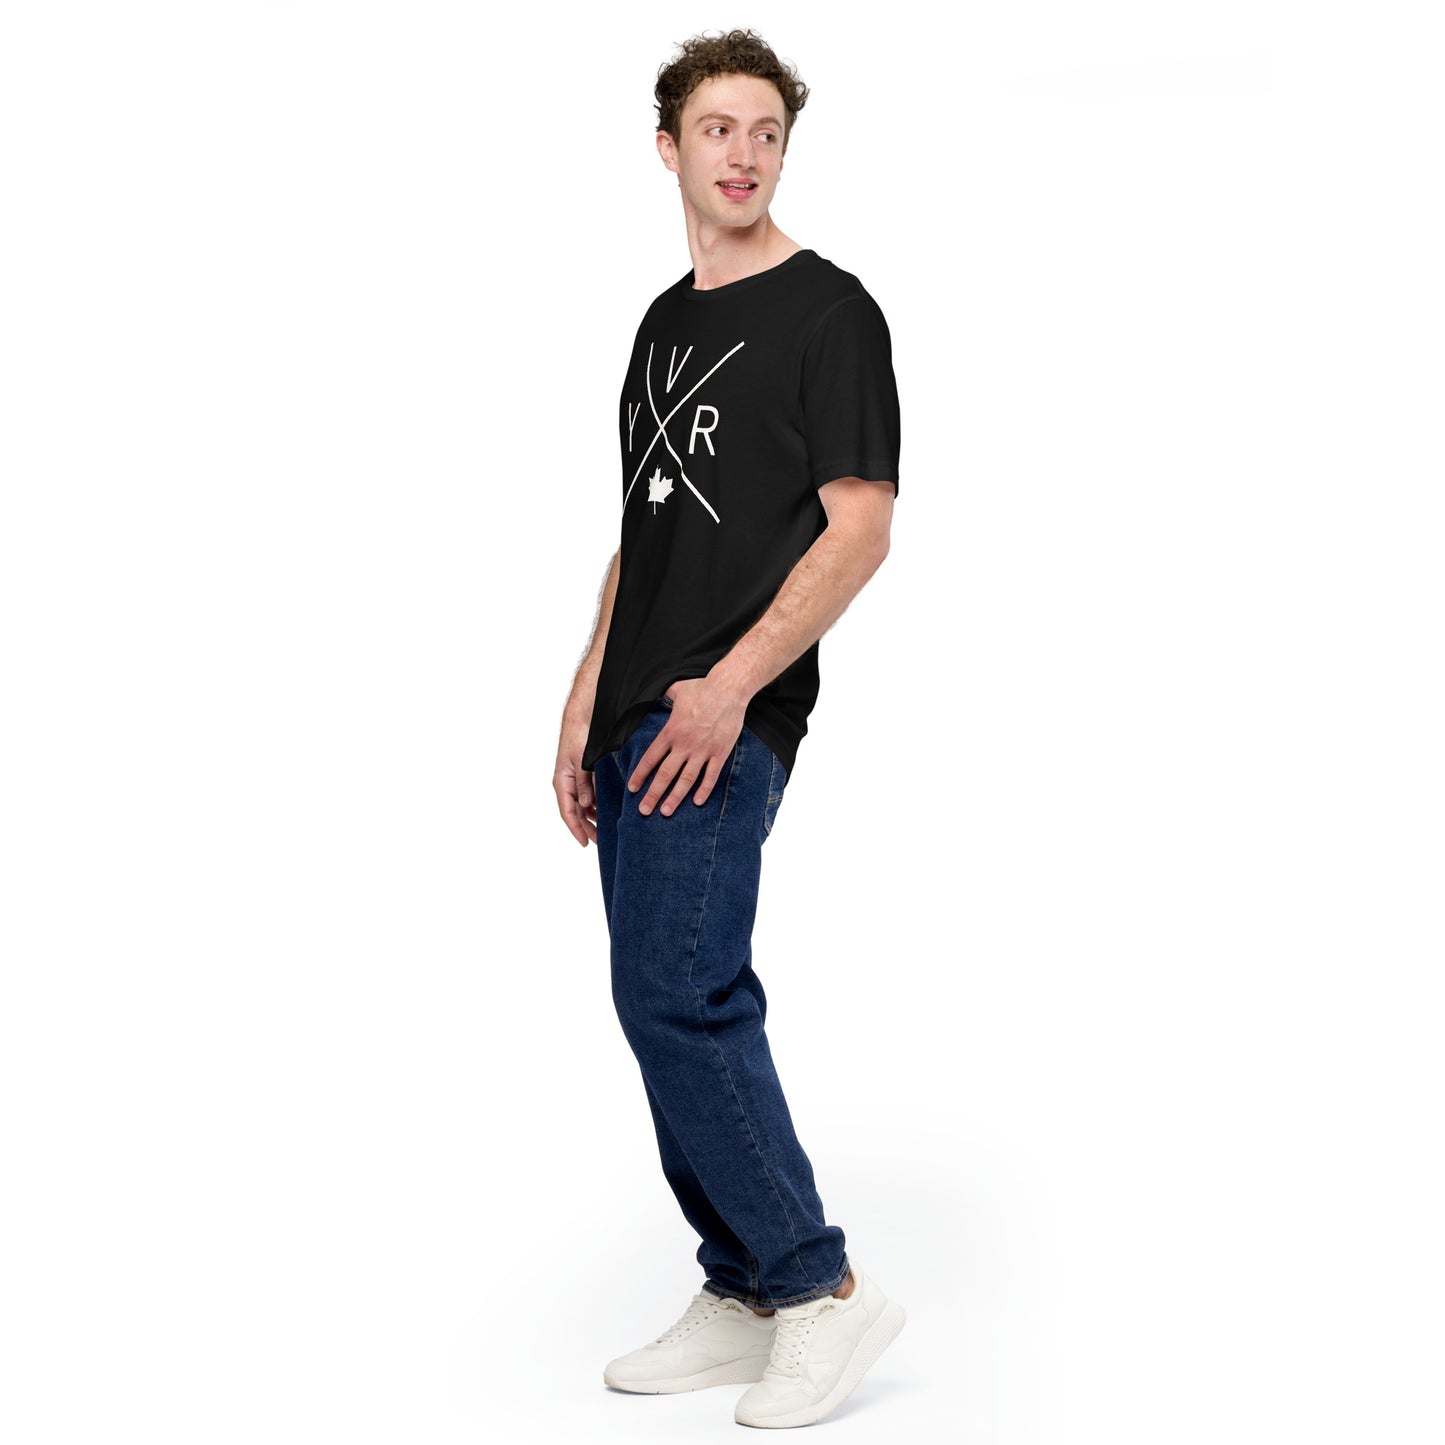 Crossed-X T-Shirt - White Graphic • YVR Vancouver • YHM Designs - Image 07